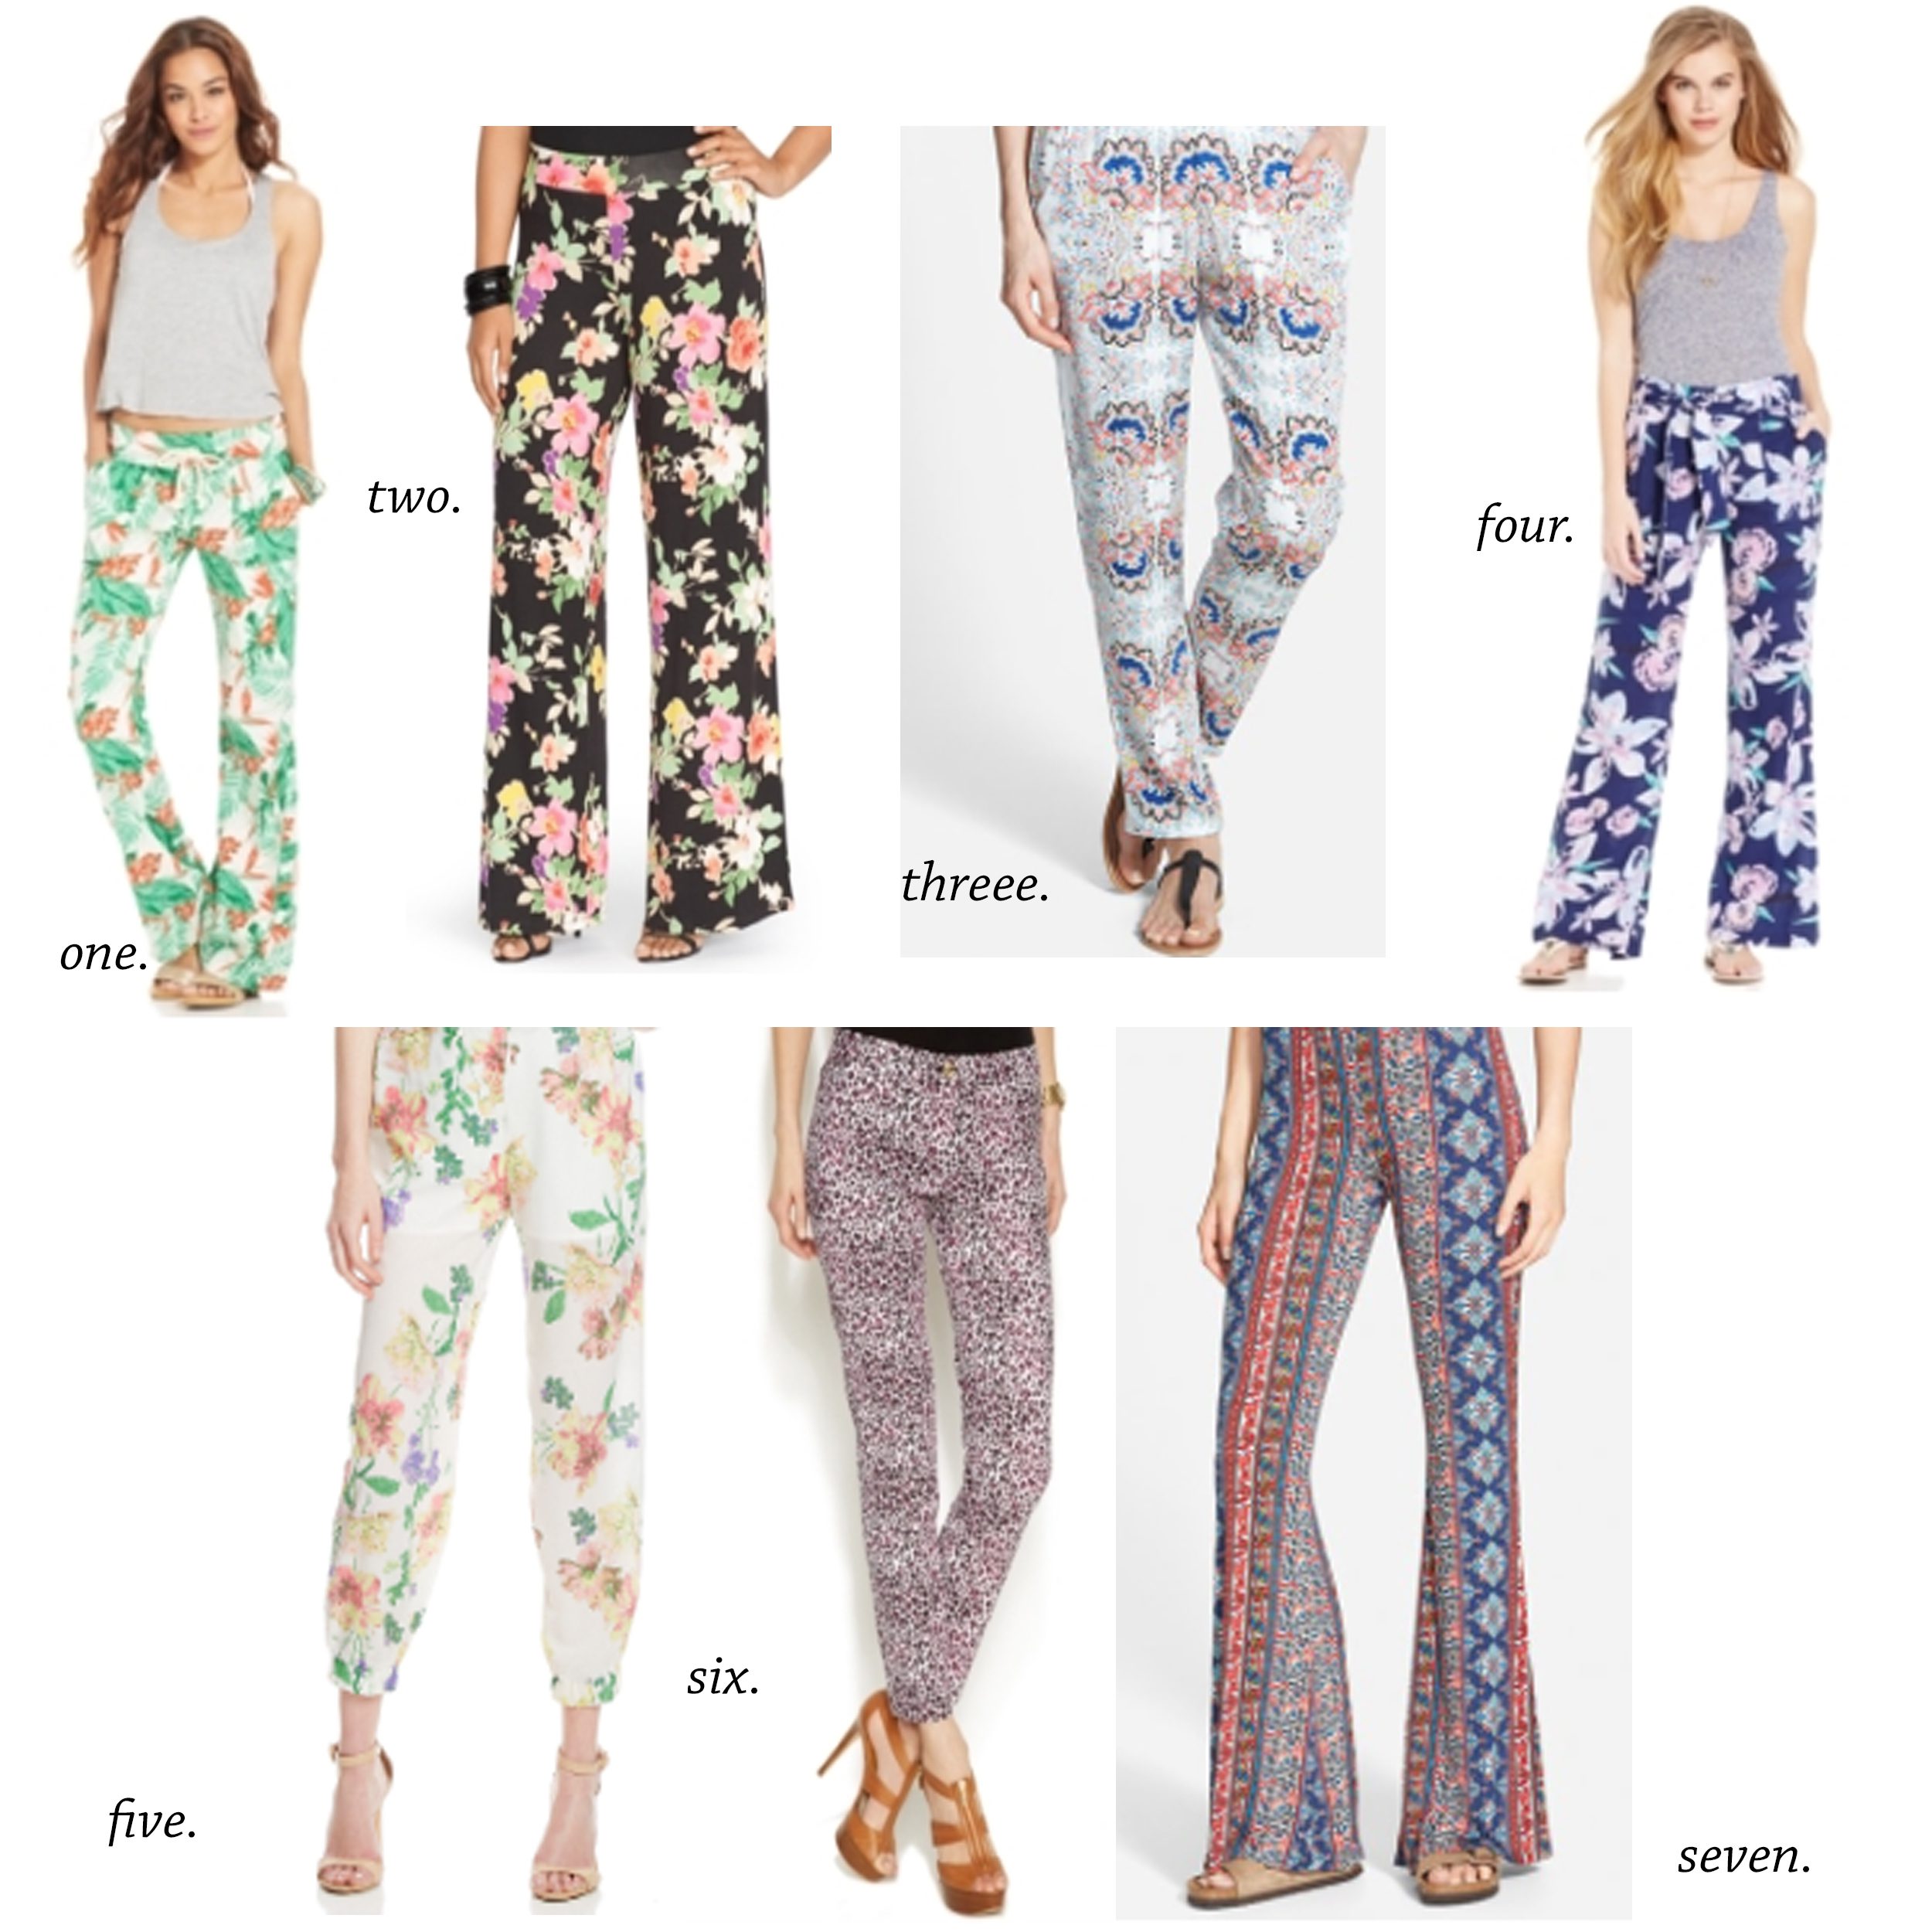 missyonmadison, melissa tierney, ootd, outfit inspo, spring, spring style, spring outfit inspo, joggers, printed joggers, how to wear joggers, street style, white blazer, long island, spring trends, spring trends 2015, wide leg printed pants, printed palazzo pants, palazzo pants, what to wear this spring, how to wear spring trends, 